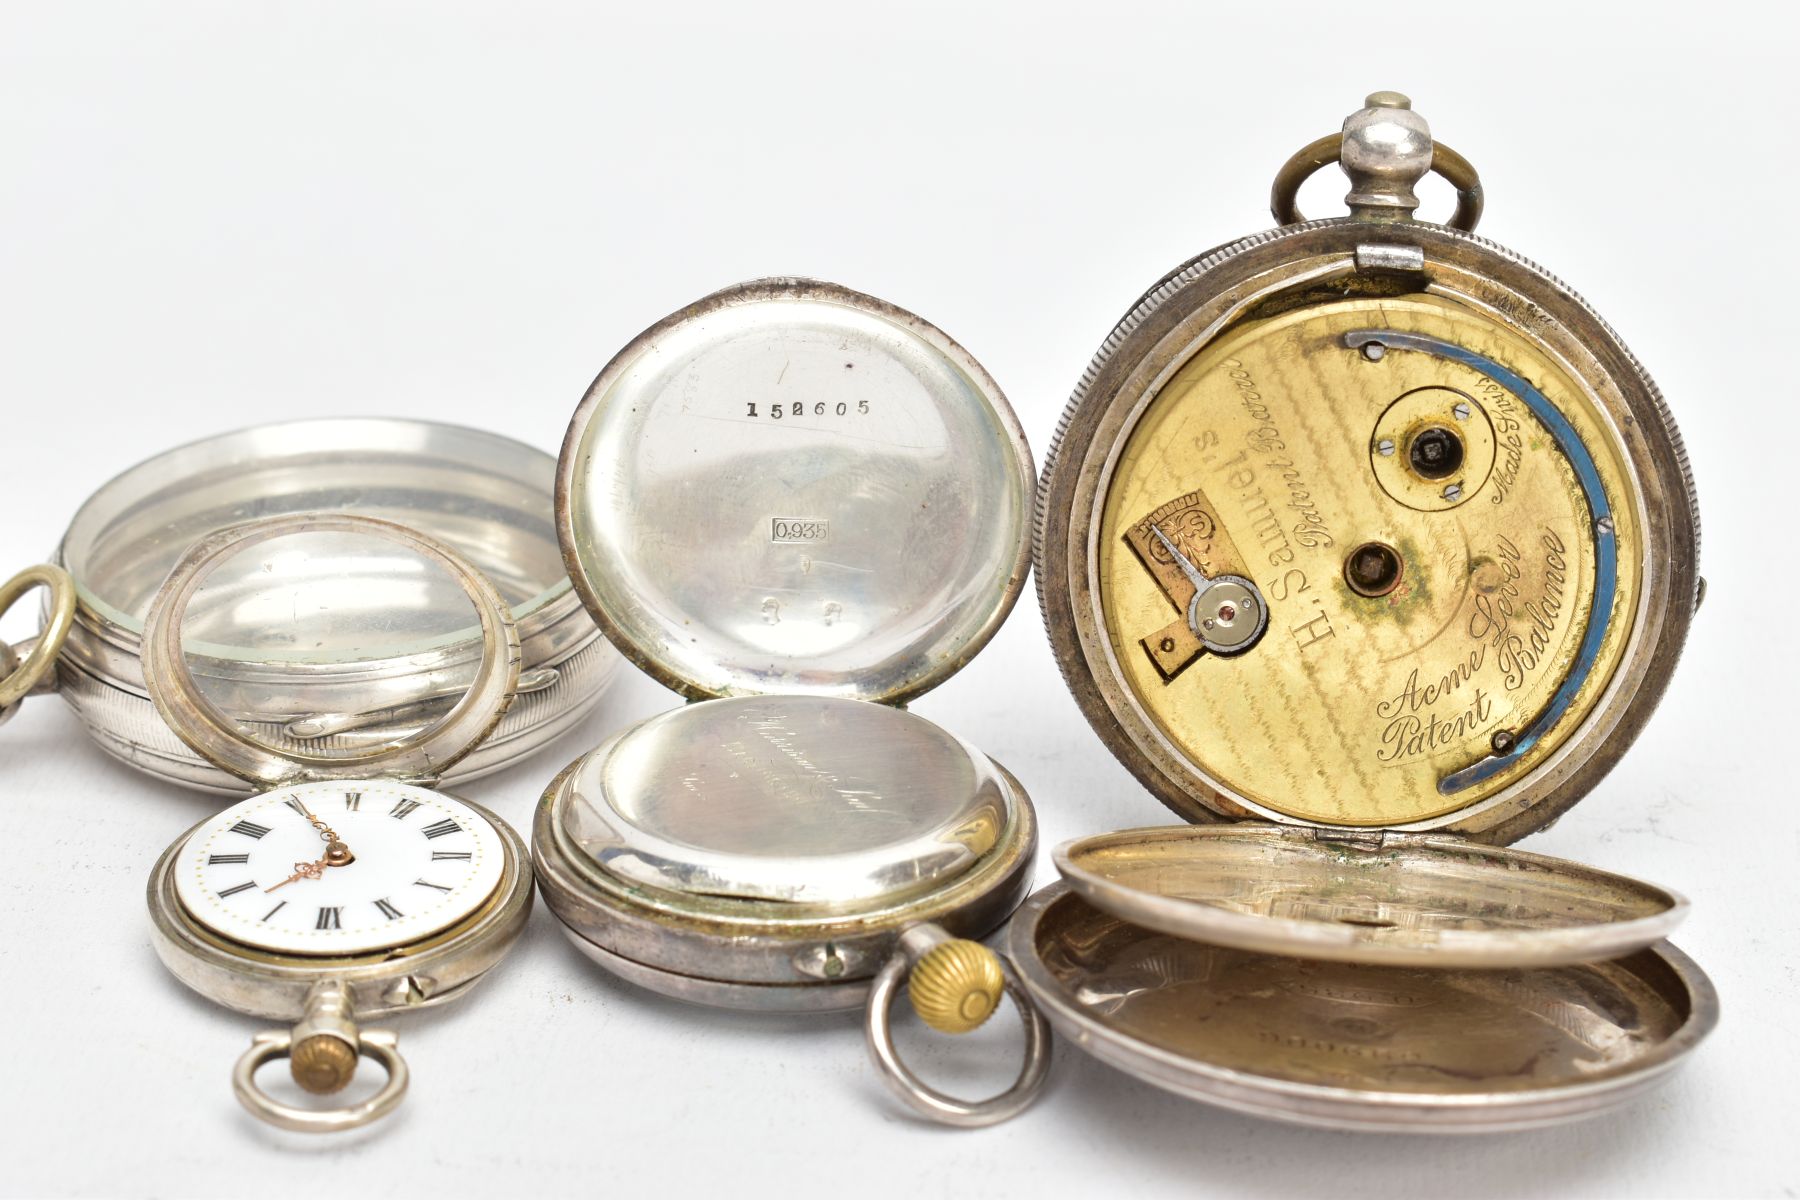 TWO OPEN FACE POCKET WATCHES, A POCKET WATCH CASE AND A SMALLER LADYS POCKET WATCH, to include a - Image 3 of 4